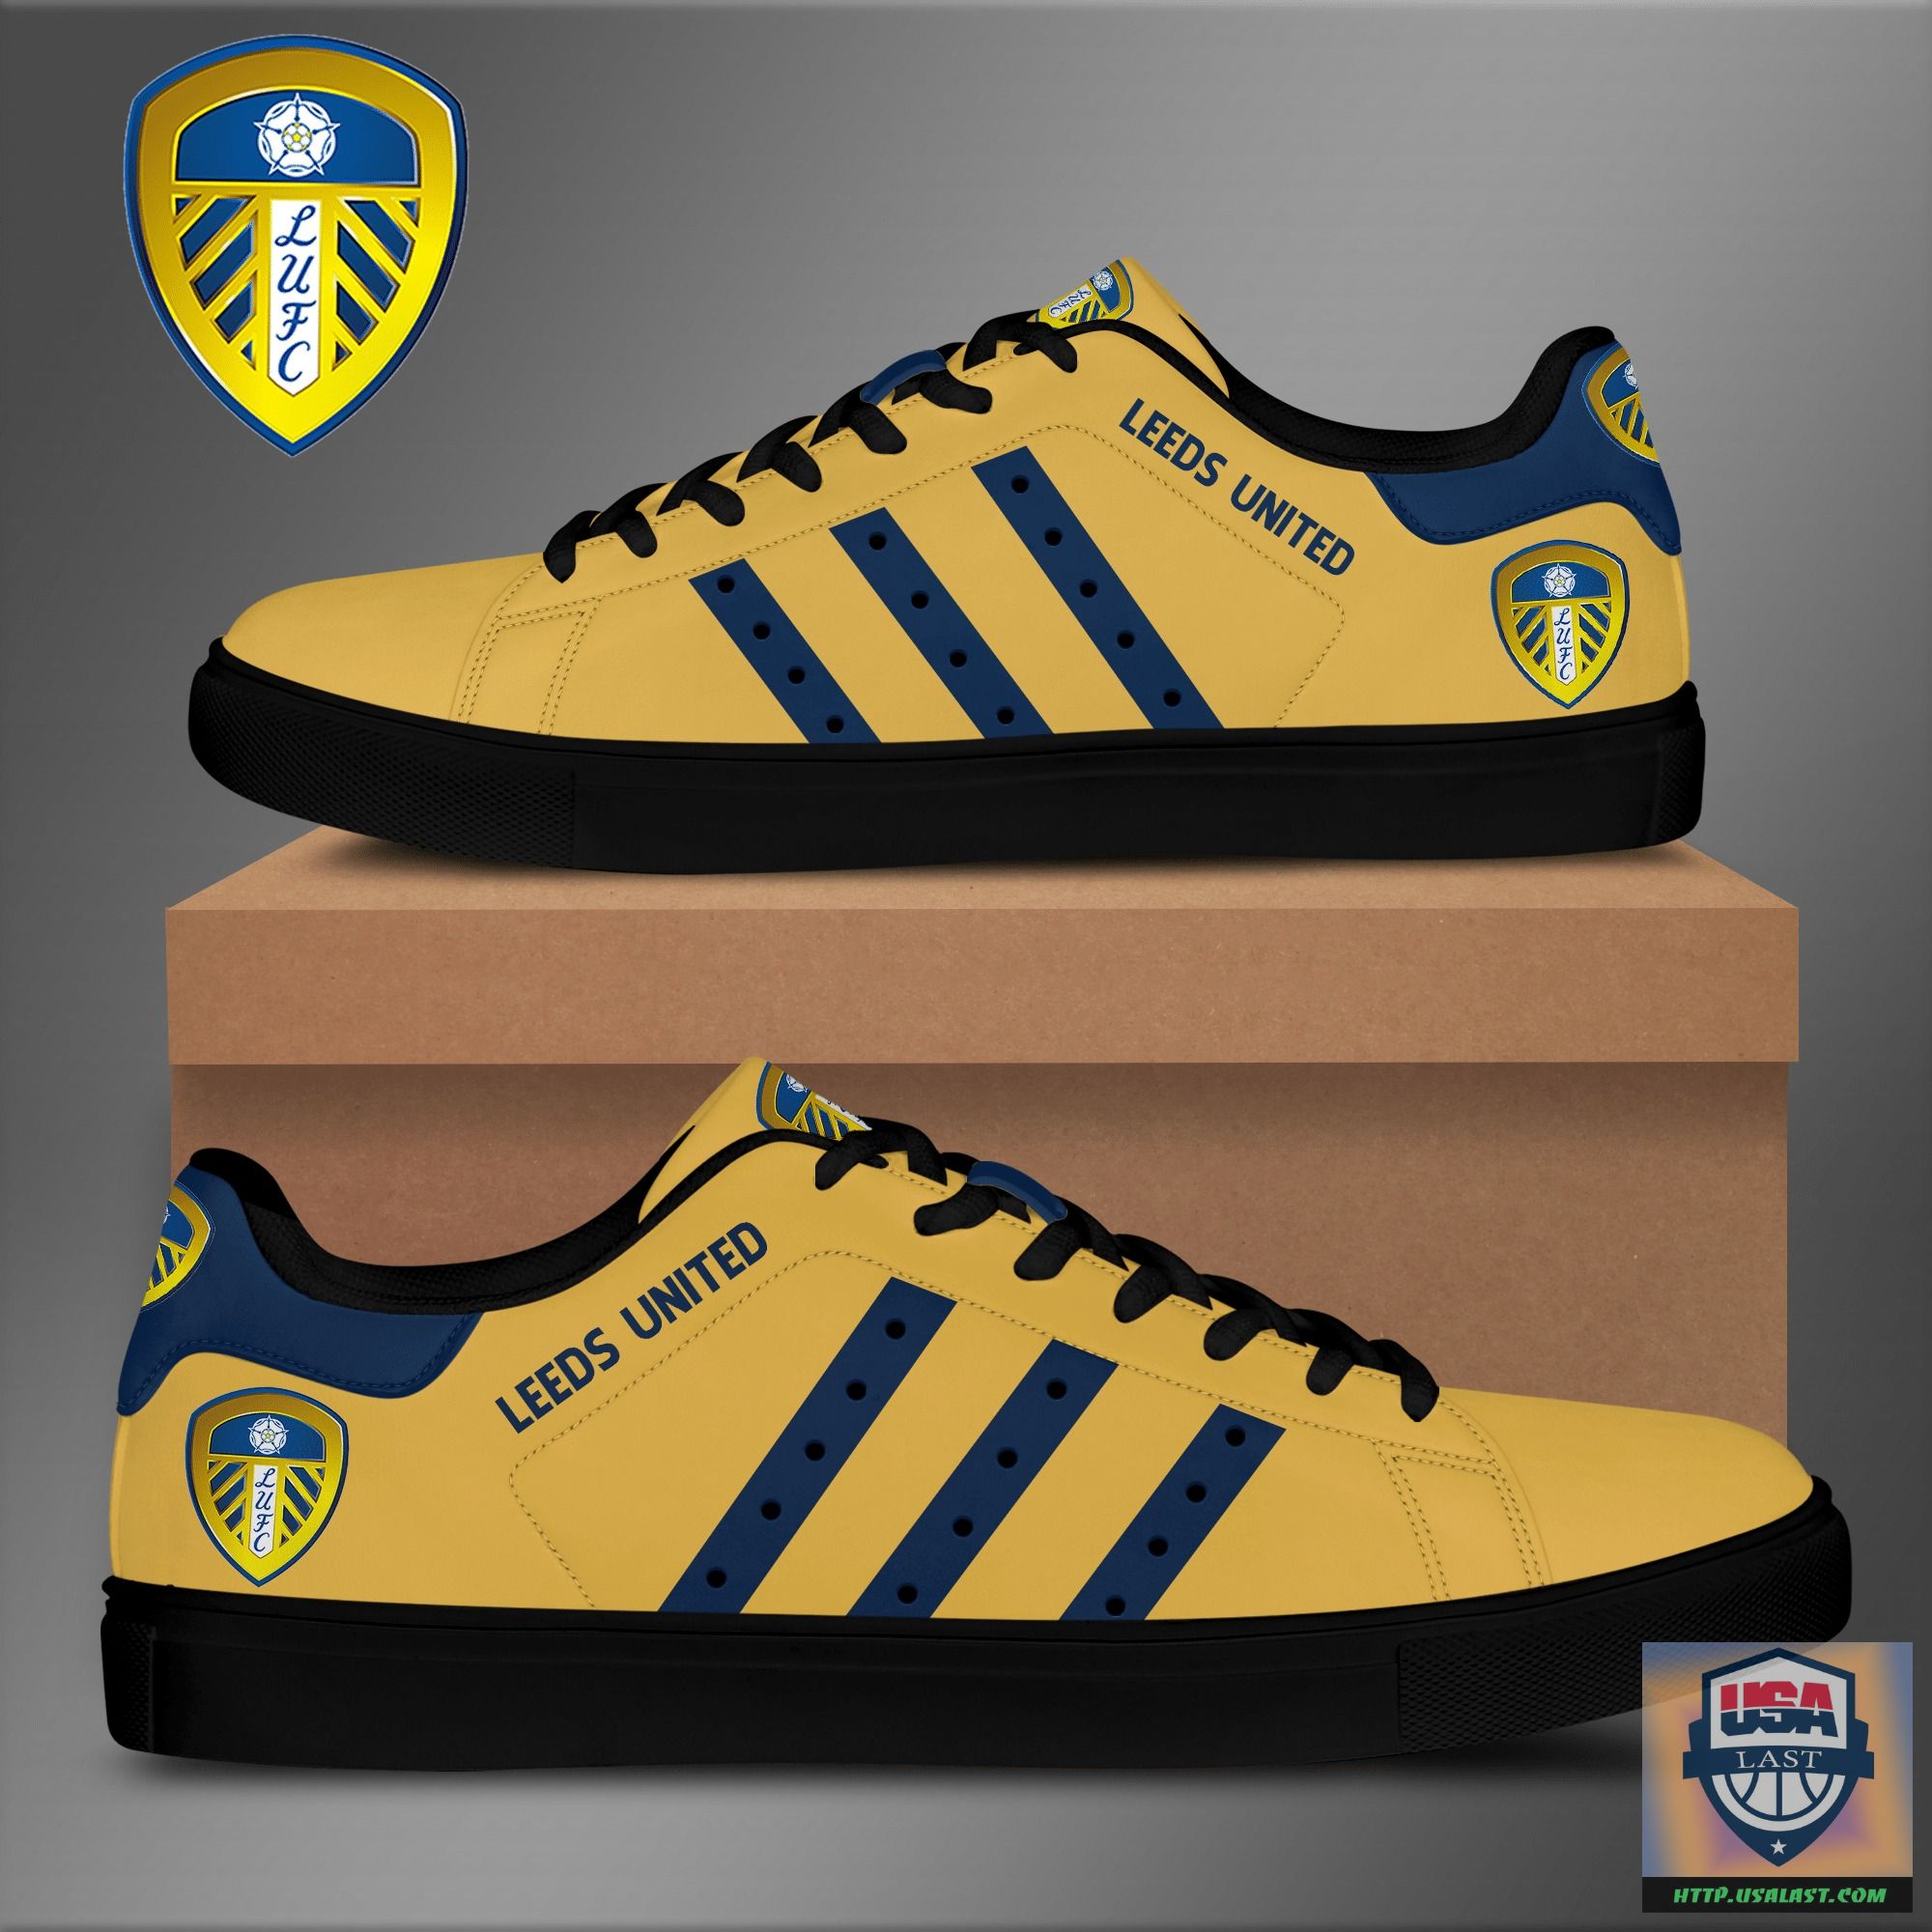 Leeds United FC Stan Smith Shoes Model 04 – Usalast